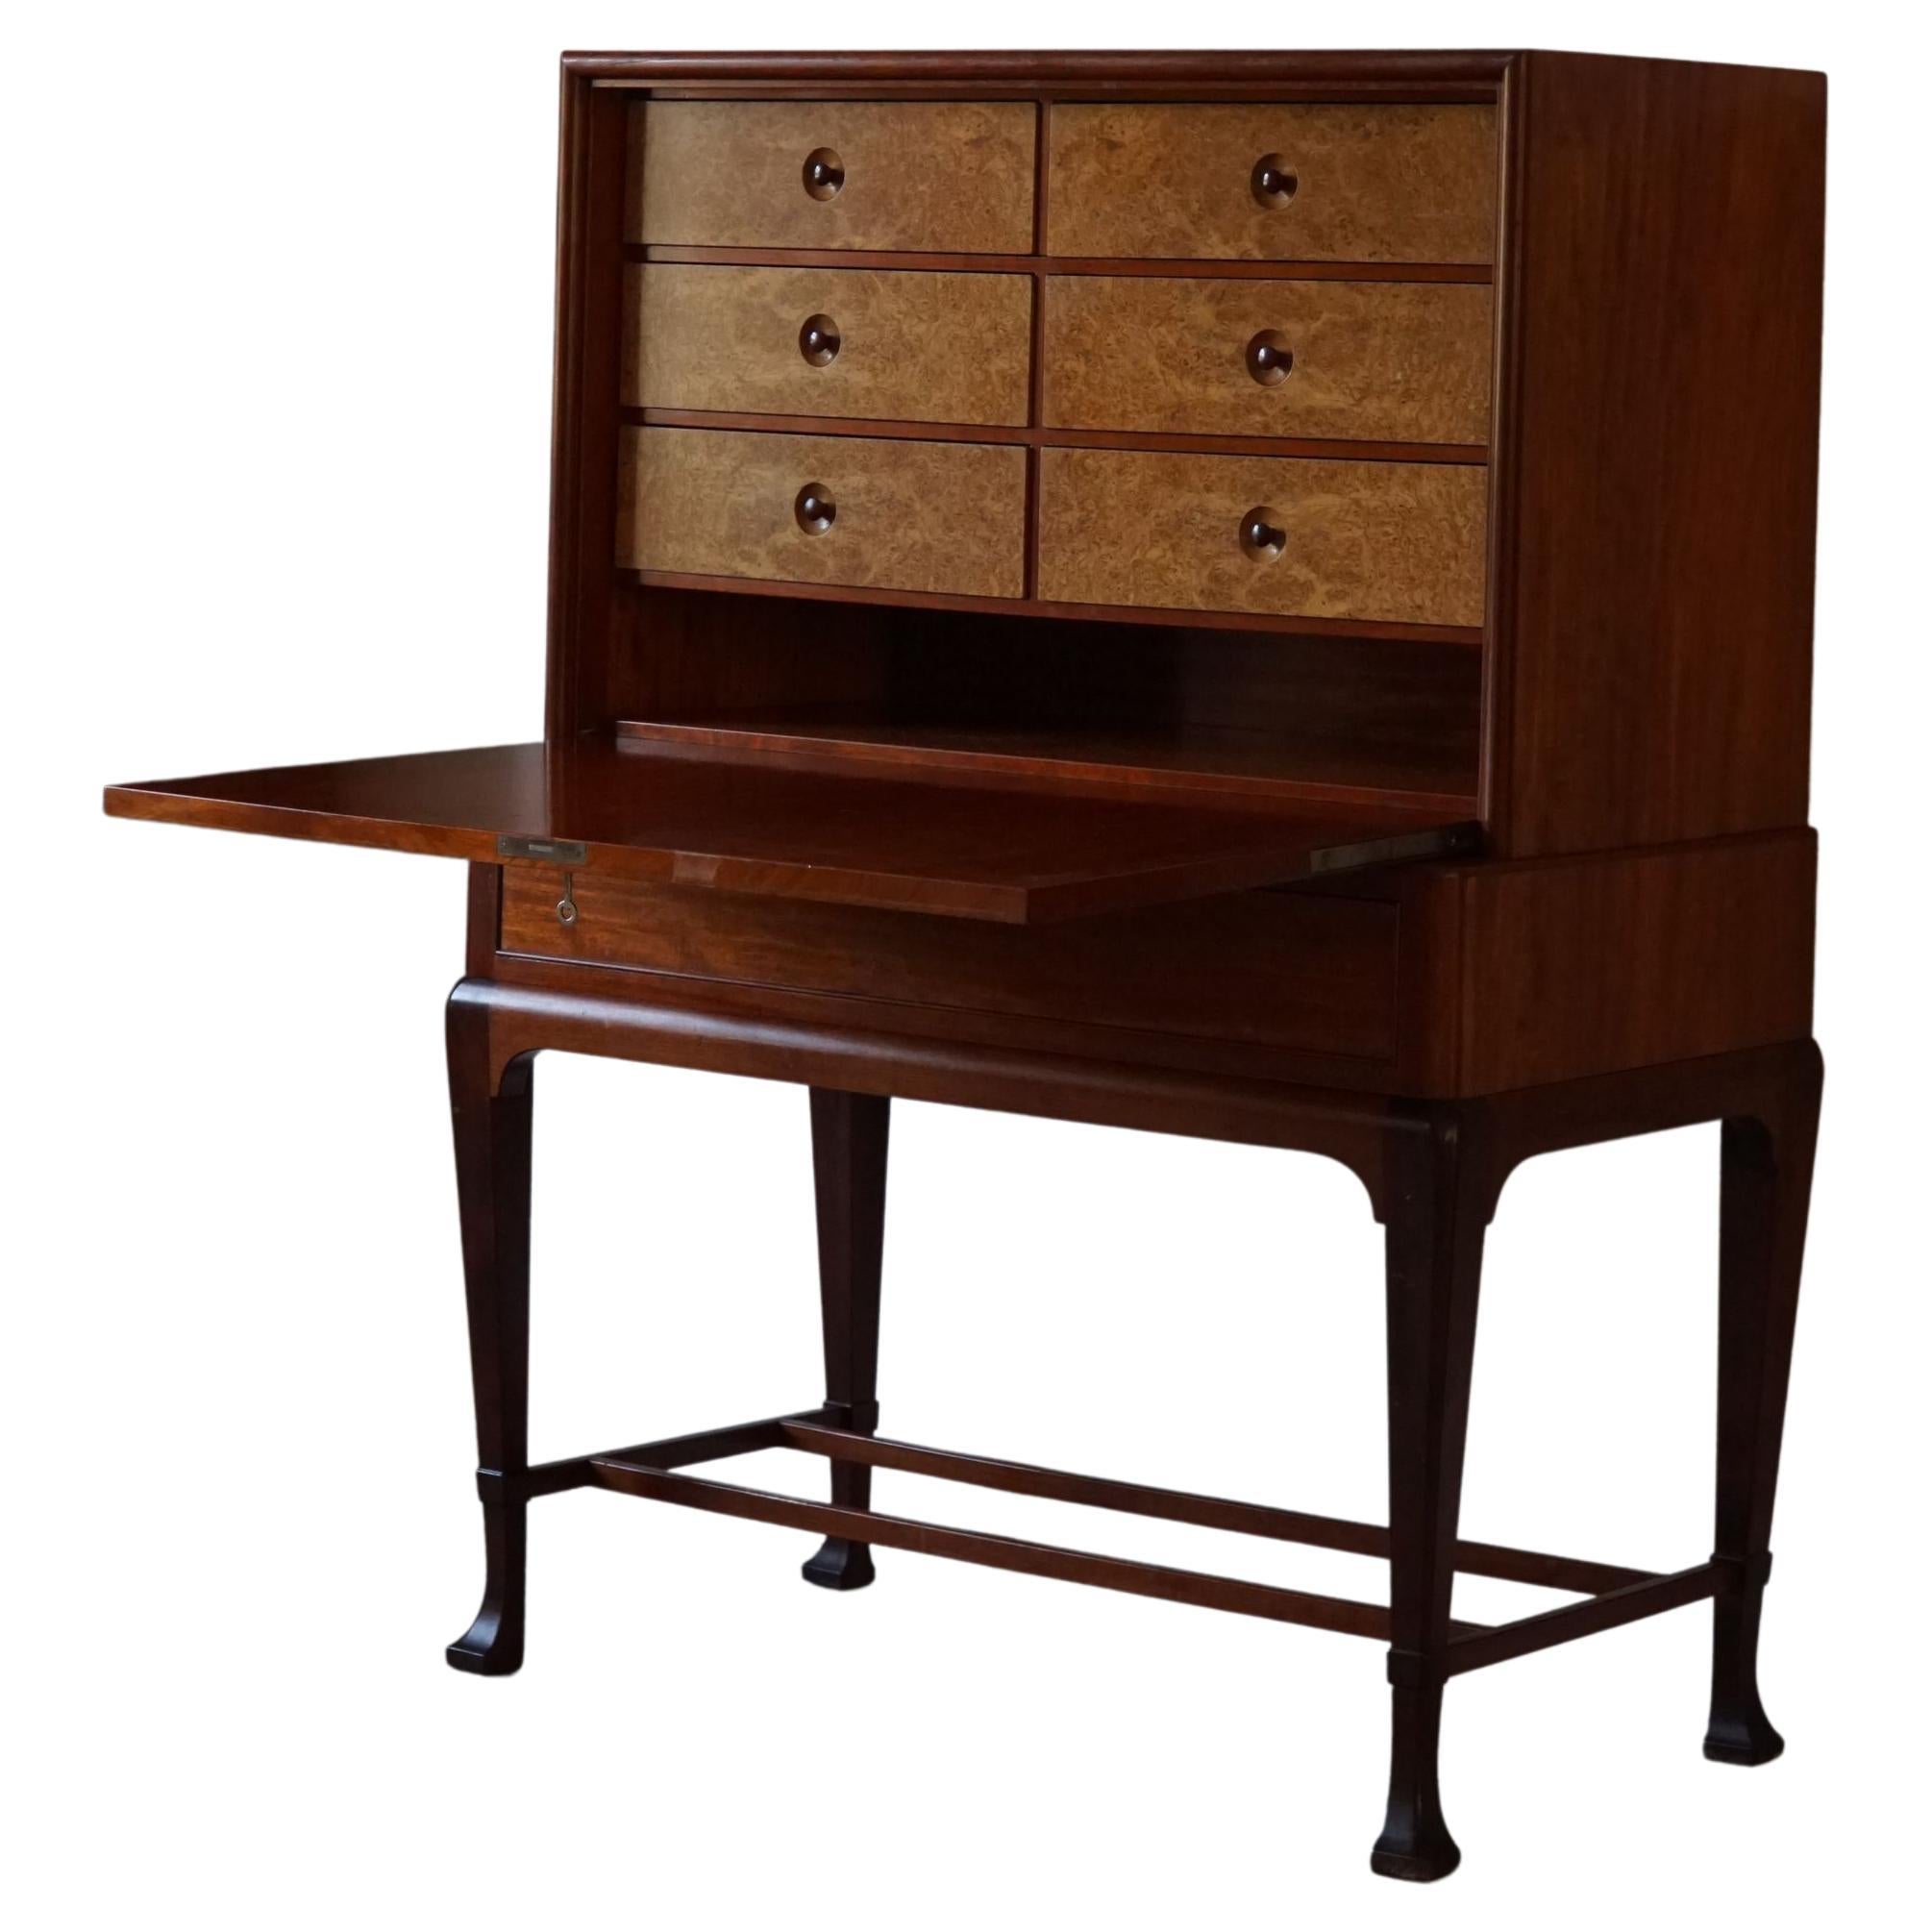 Art Deco Cabinet / Secretary, Made by a Danish Cabinetmaker, Early 20th Century